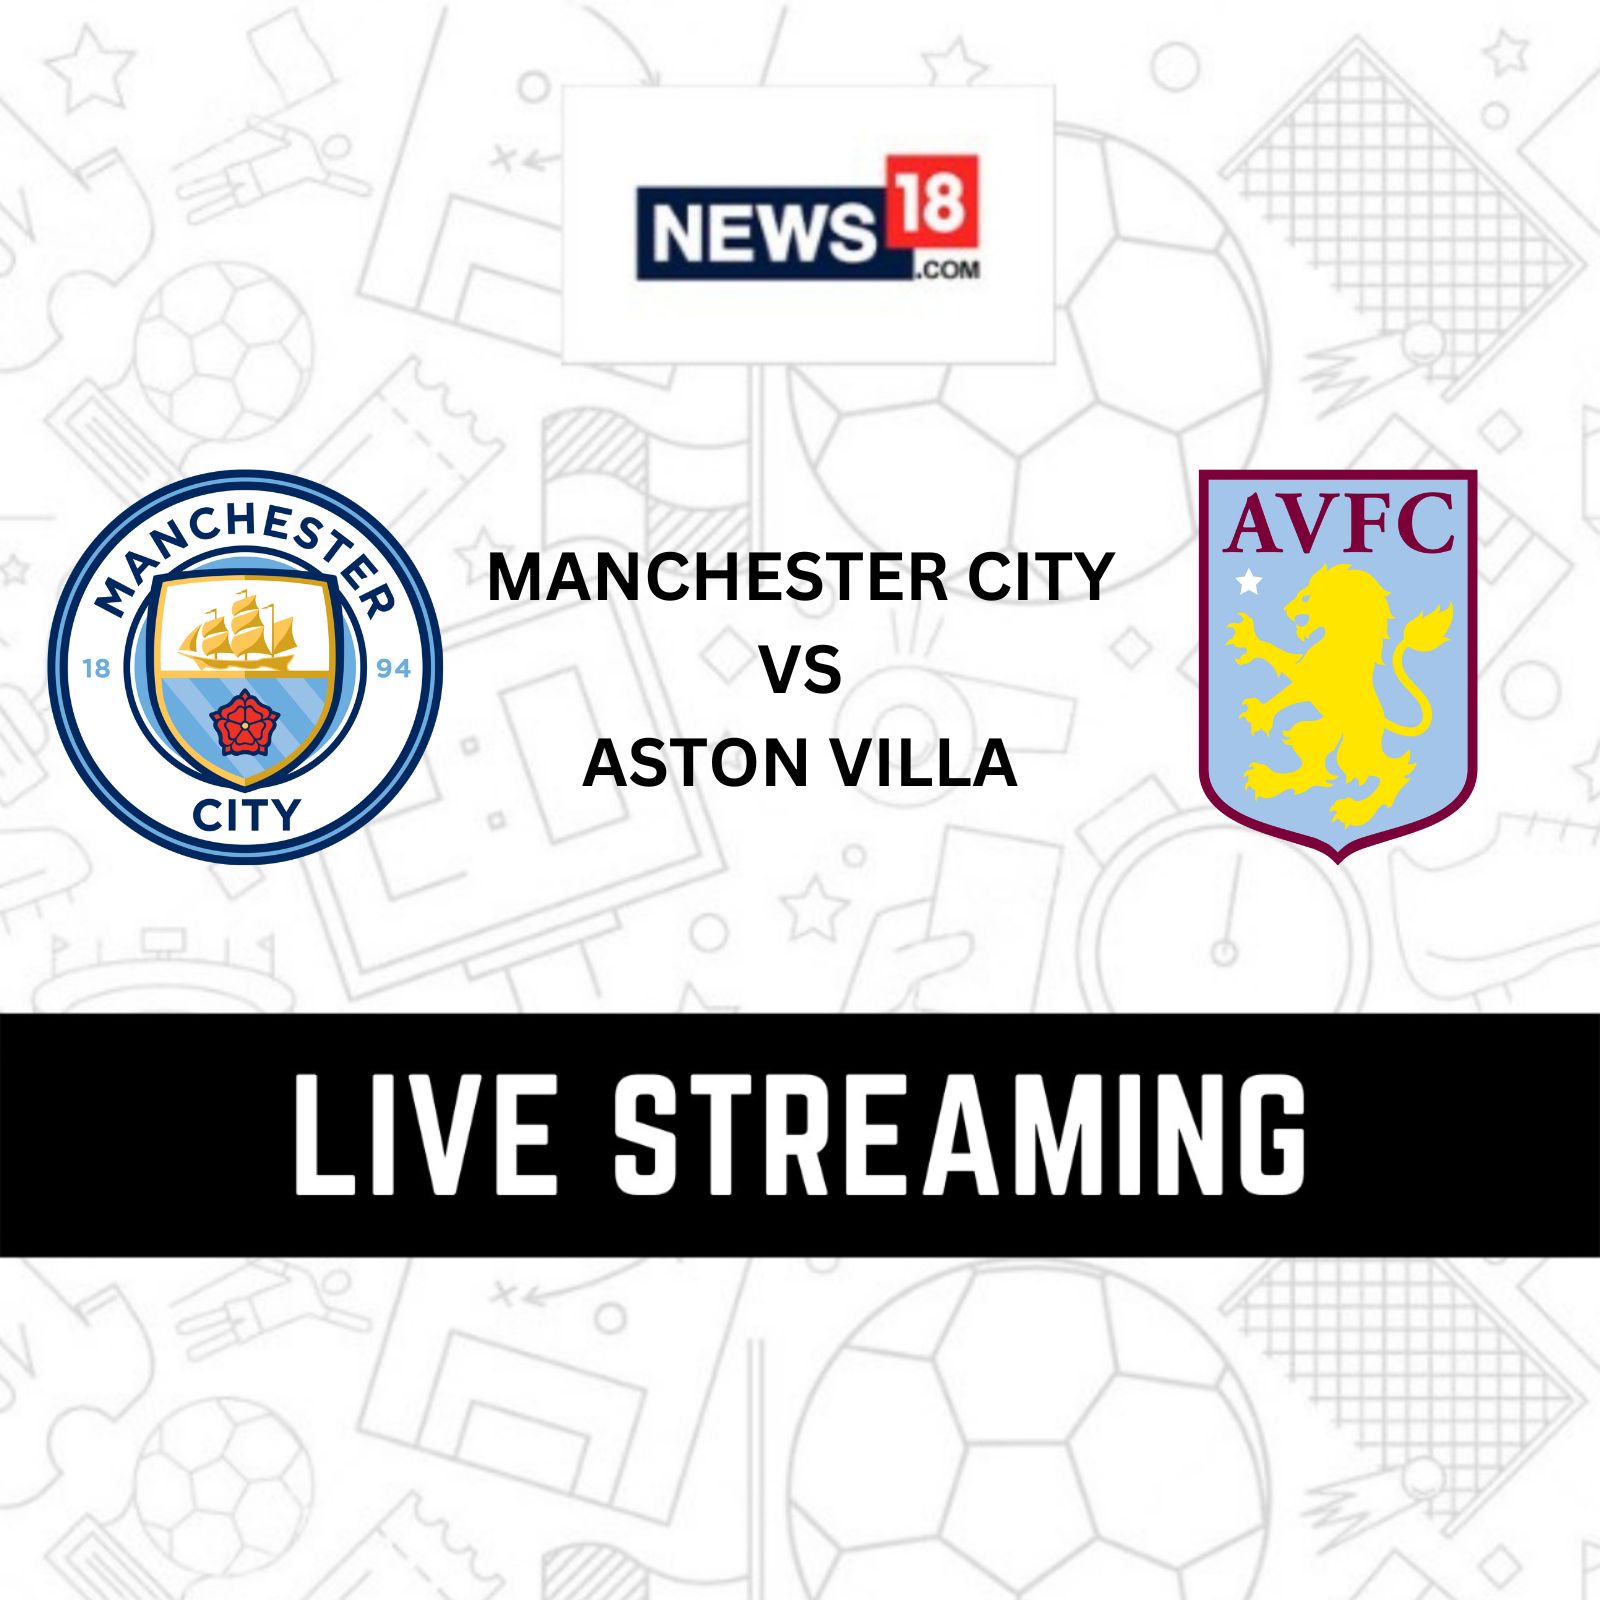 Manchester City vs Aston Villa Live Streaming When and Where to Watch Premier League Live Coverage on Live TV Online